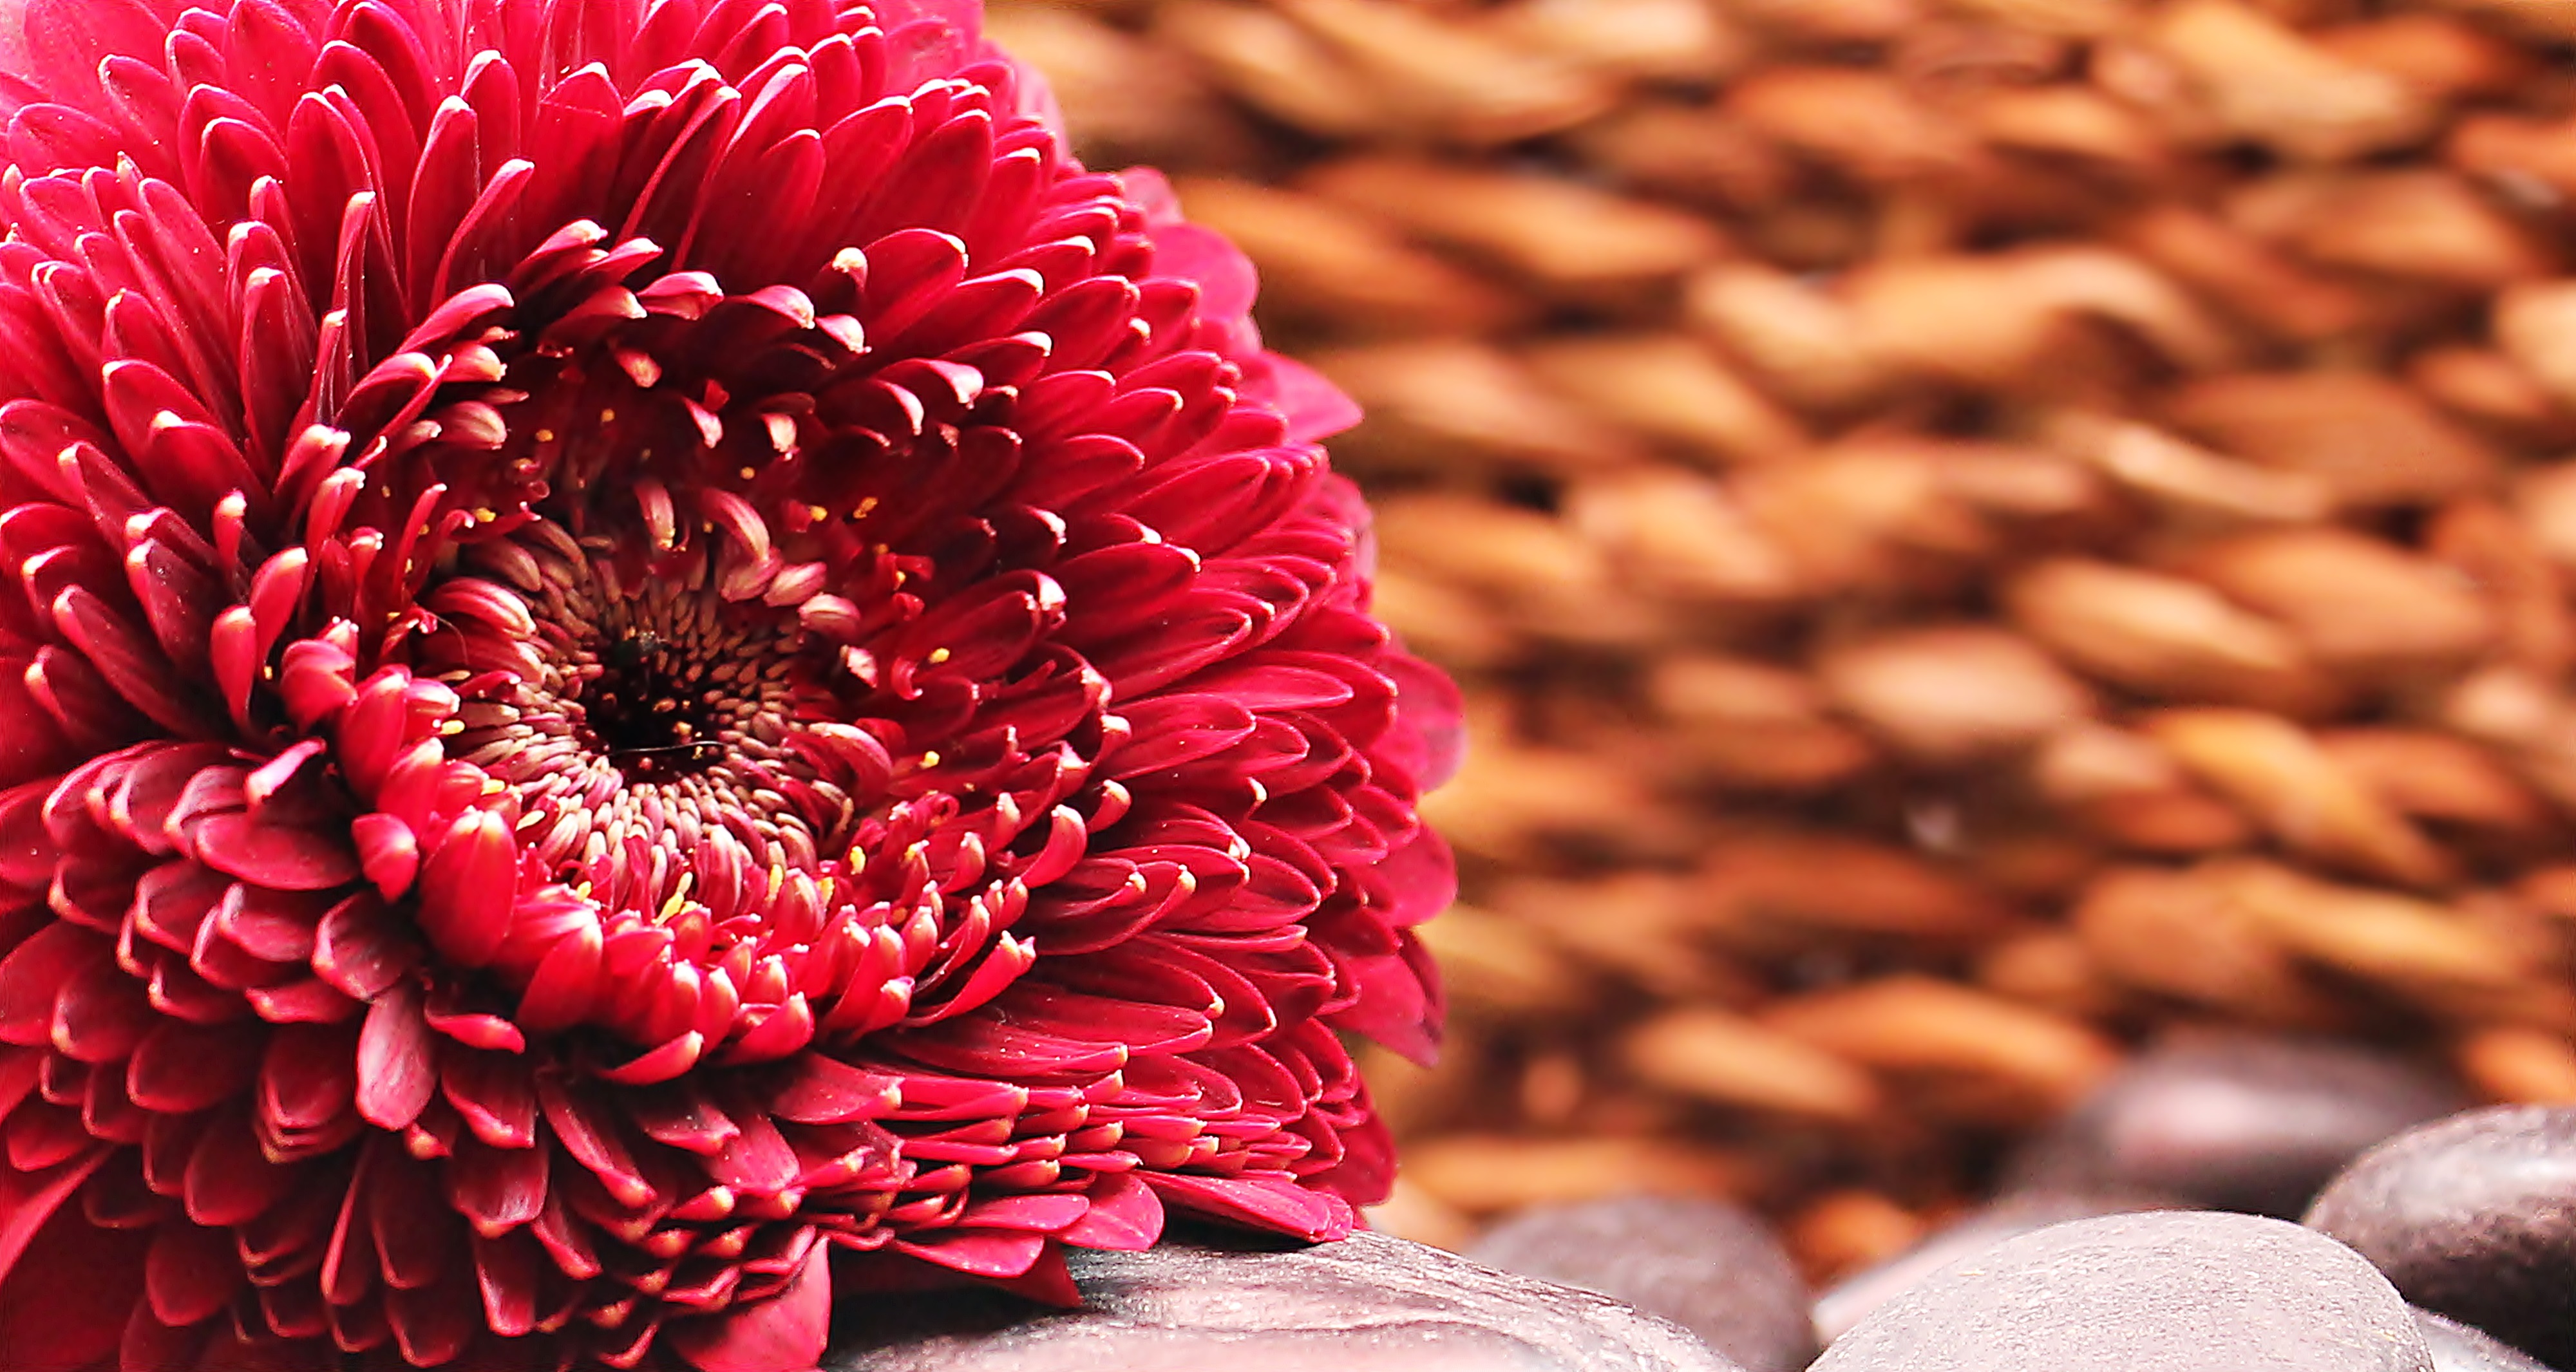 156601 Screensavers and Wallpapers Gerbera for phone. Download flowers, flower, petals, bud, gerbera pictures for free